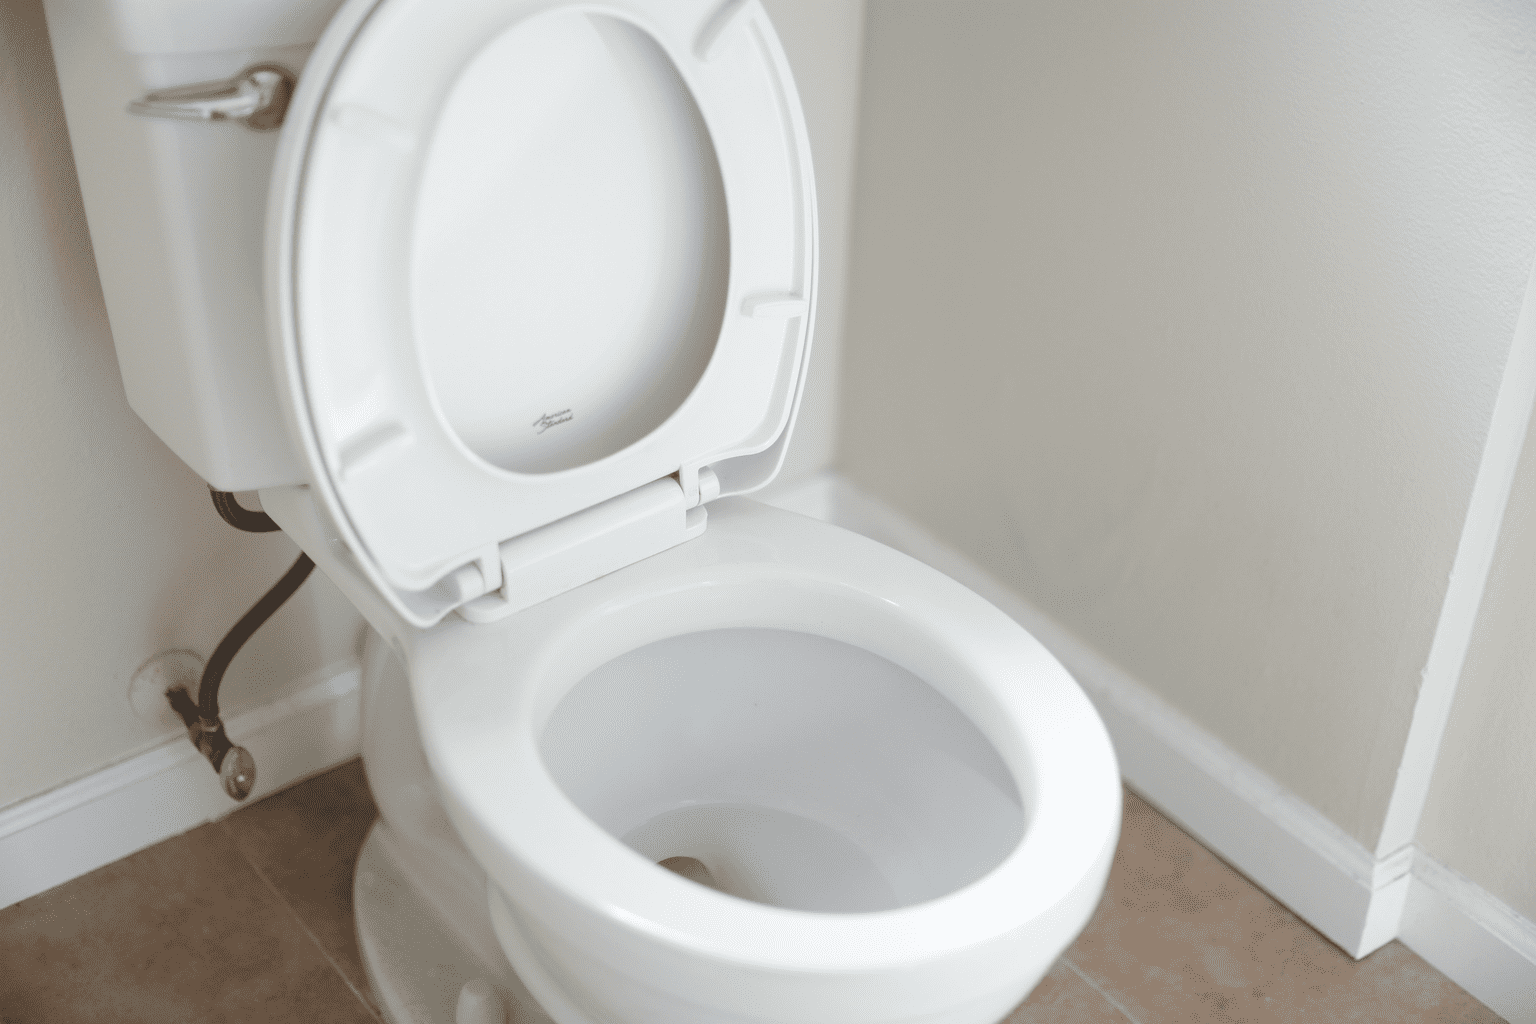 Why Does My Toilet Stink?